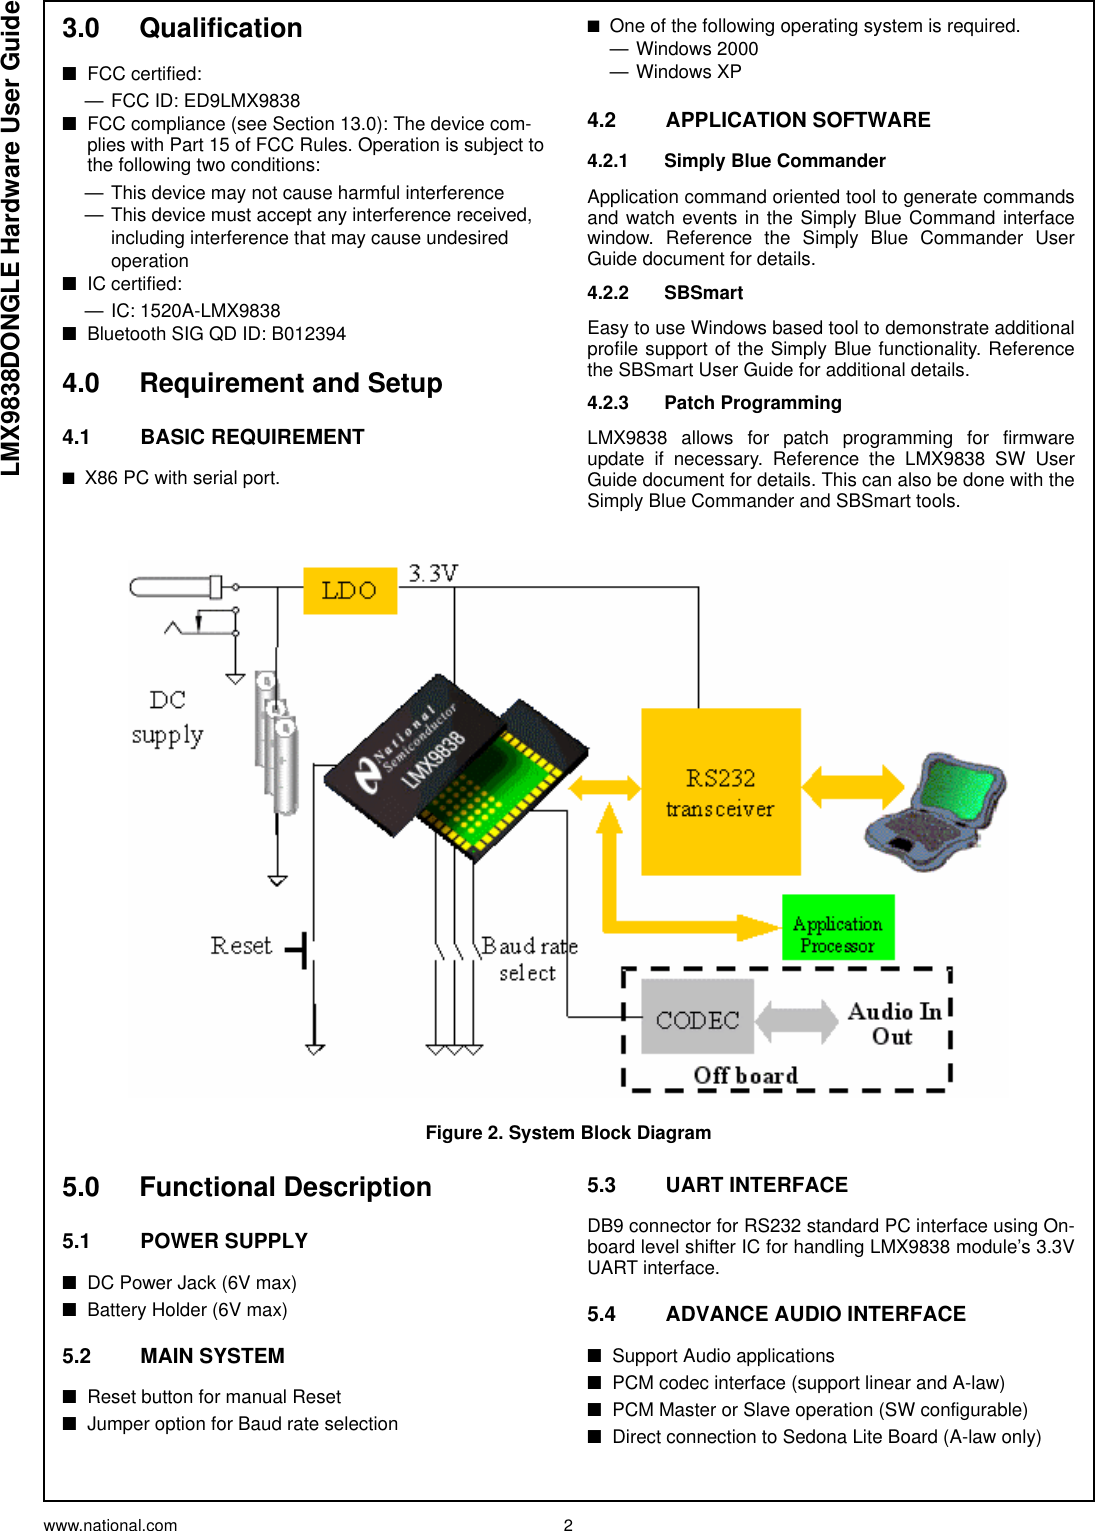 www.national.com 2LMX9838DONGLE Hardware User Guide3.0 Qualification■FCC certified: — FCC ID: ED9LMX9838■FCC compliance (see Section 13.0): The device com-plies with Part 15 of FCC Rules. Operation is subject to the following two conditions:— This device may not cause harmful interference— This device must accept any interference received, including interference that may cause undesired operation■IC certified:— IC: 1520A-LMX9838■Bluetooth SIG QD ID: B0123944.0 Requirement and Setup4.1 BASIC REQUIREMENT■X86 PC with serial port.■One of the following operating system is required.— Windows 2000—Windows XP4.2 APPLICATION SOFTWARE4.2.1 Simply Blue CommanderApplication command oriented tool to generate commandsand watch events in the Simply Blue Command interfacewindow. Reference the Simply Blue Commander UserGuide document for details.4.2.2 SBSmartEasy to use Windows based tool to demonstrate additionalprofile support of the Simply Blue functionality. Referencethe SBSmart User Guide for additional details.4.2.3 Patch ProgrammingLMX9838 allows for patch programming for firmwareupdate if necessary. Reference the LMX9838 SW UserGuide document for details. This can also be done with theSimply Blue Commander and SBSmart tools.5.0 Functional Description5.1 POWER SUPPLY■DC Power Jack (6V max)■Battery Holder (6V max)5.2 MAIN SYSTEM■Reset button for manual Reset■Jumper option for Baud rate selection5.3 UART INTERFACEDB9 connector for RS232 standard PC interface using On-board level shifter IC for handling LMX9838 module’s 3.3VUART interface.5.4 ADVANCE AUDIO INTERFACE ■Support Audio applications■PCM codec interface (support linear and A-law)■PCM Master or Slave operation (SW configurable)■Direct connection to Sedona Lite Board (A-law only)Figure 2. System Block Diagram